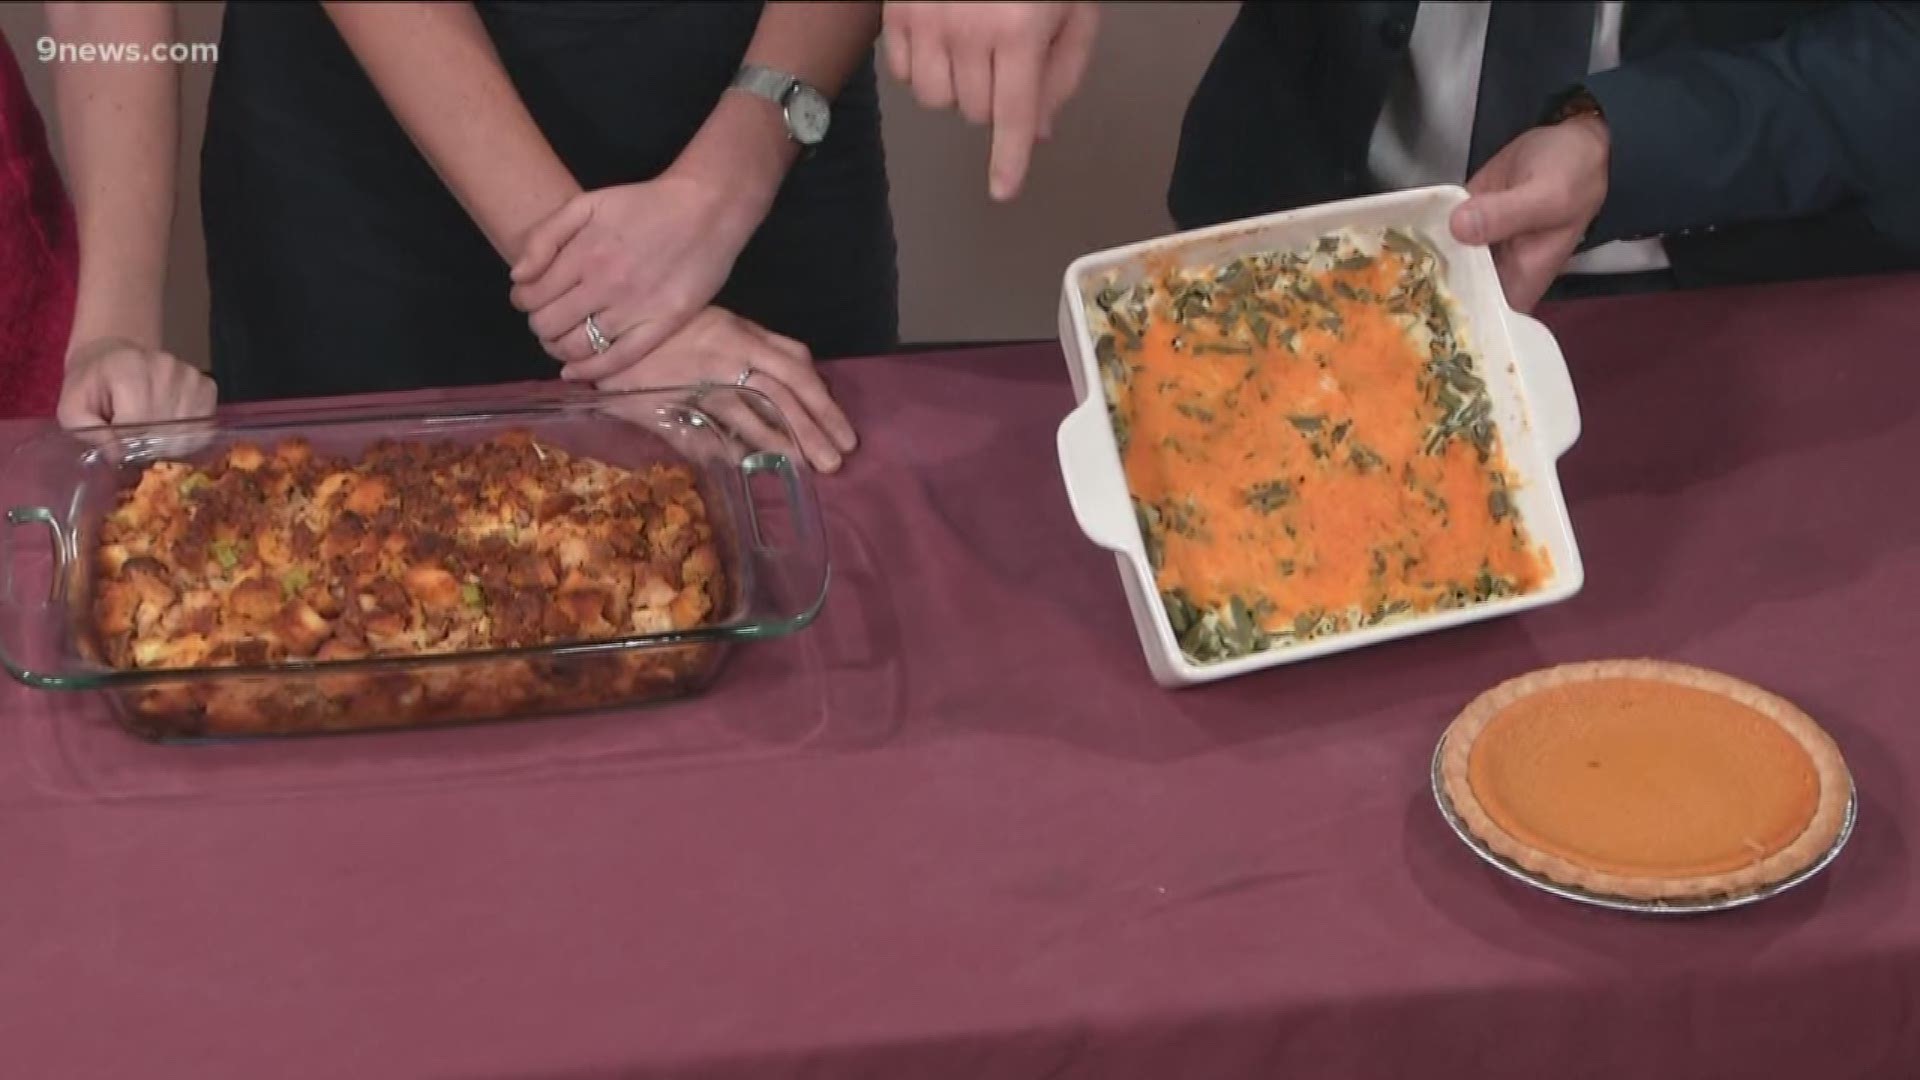 9NEWS is getting into the holiday spirit ahead of Thanksgiving. On Sunday morning, Jon, Kylie, and I shared our favorite side dishes. Here are our recipes.